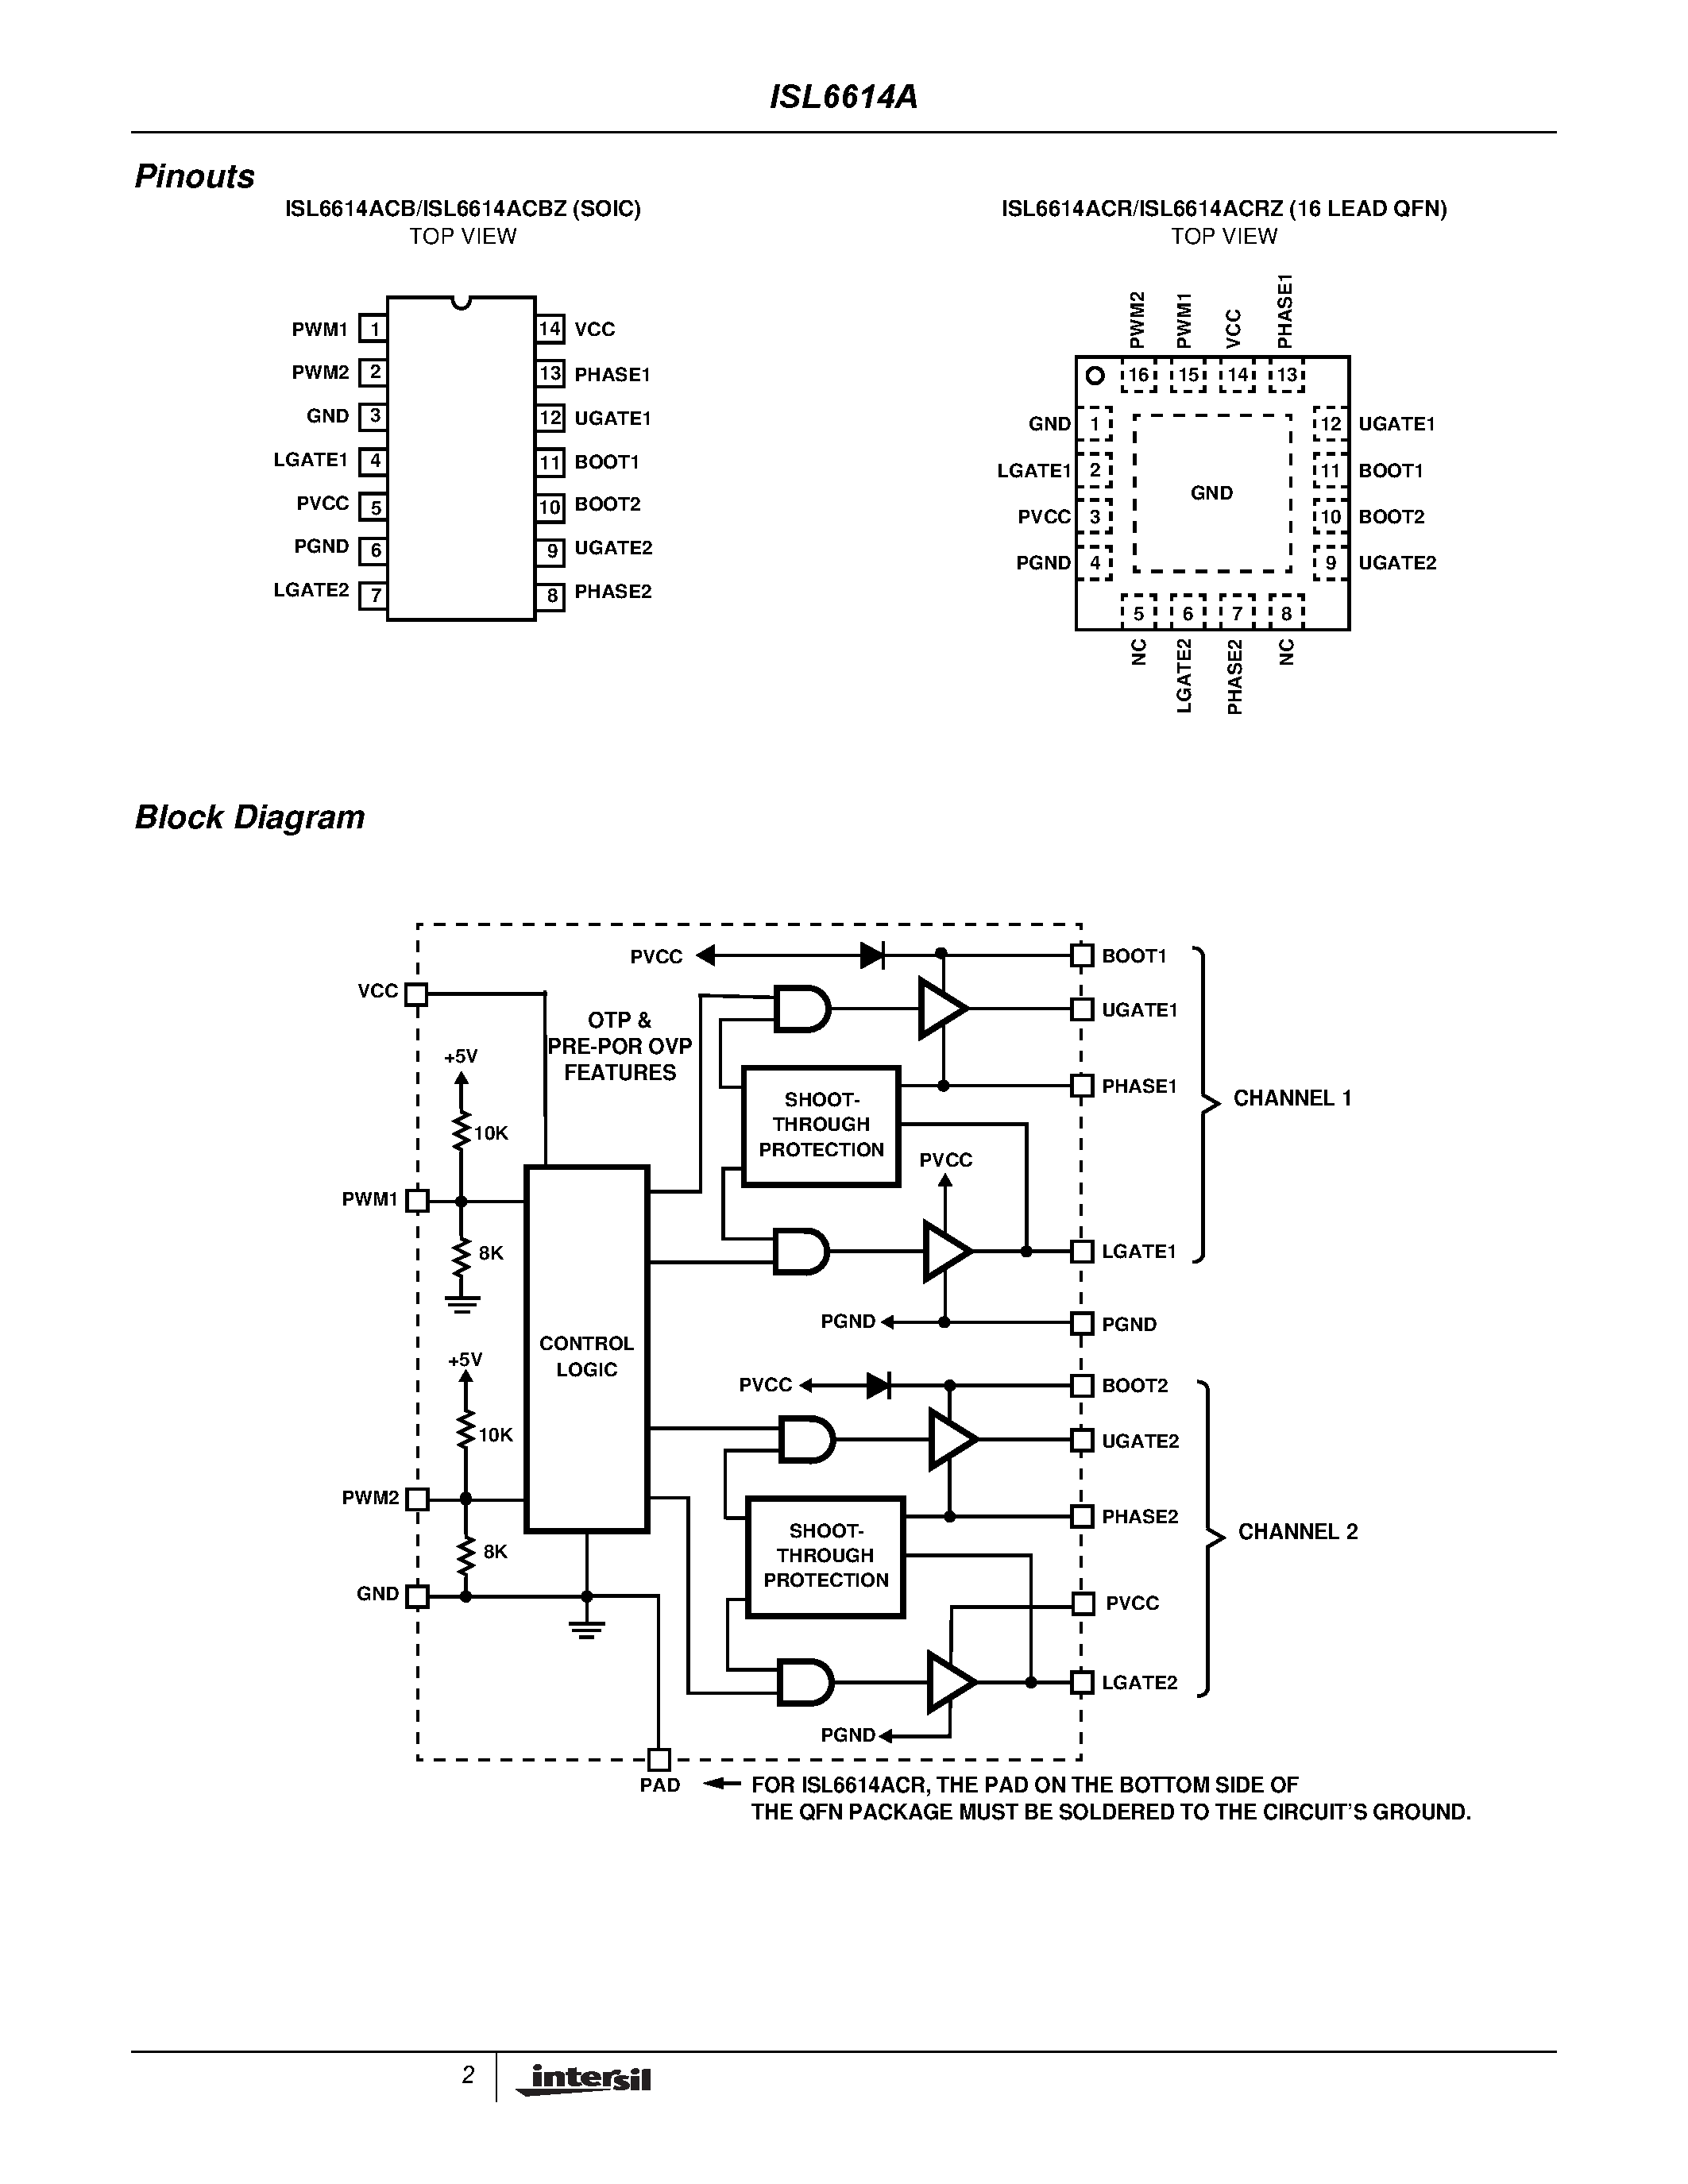 Datasheet ISL6614ACR - Dual Advanced Synchronous Rectified Buck MOSFET Drivers with Pre-POR OVP page 2